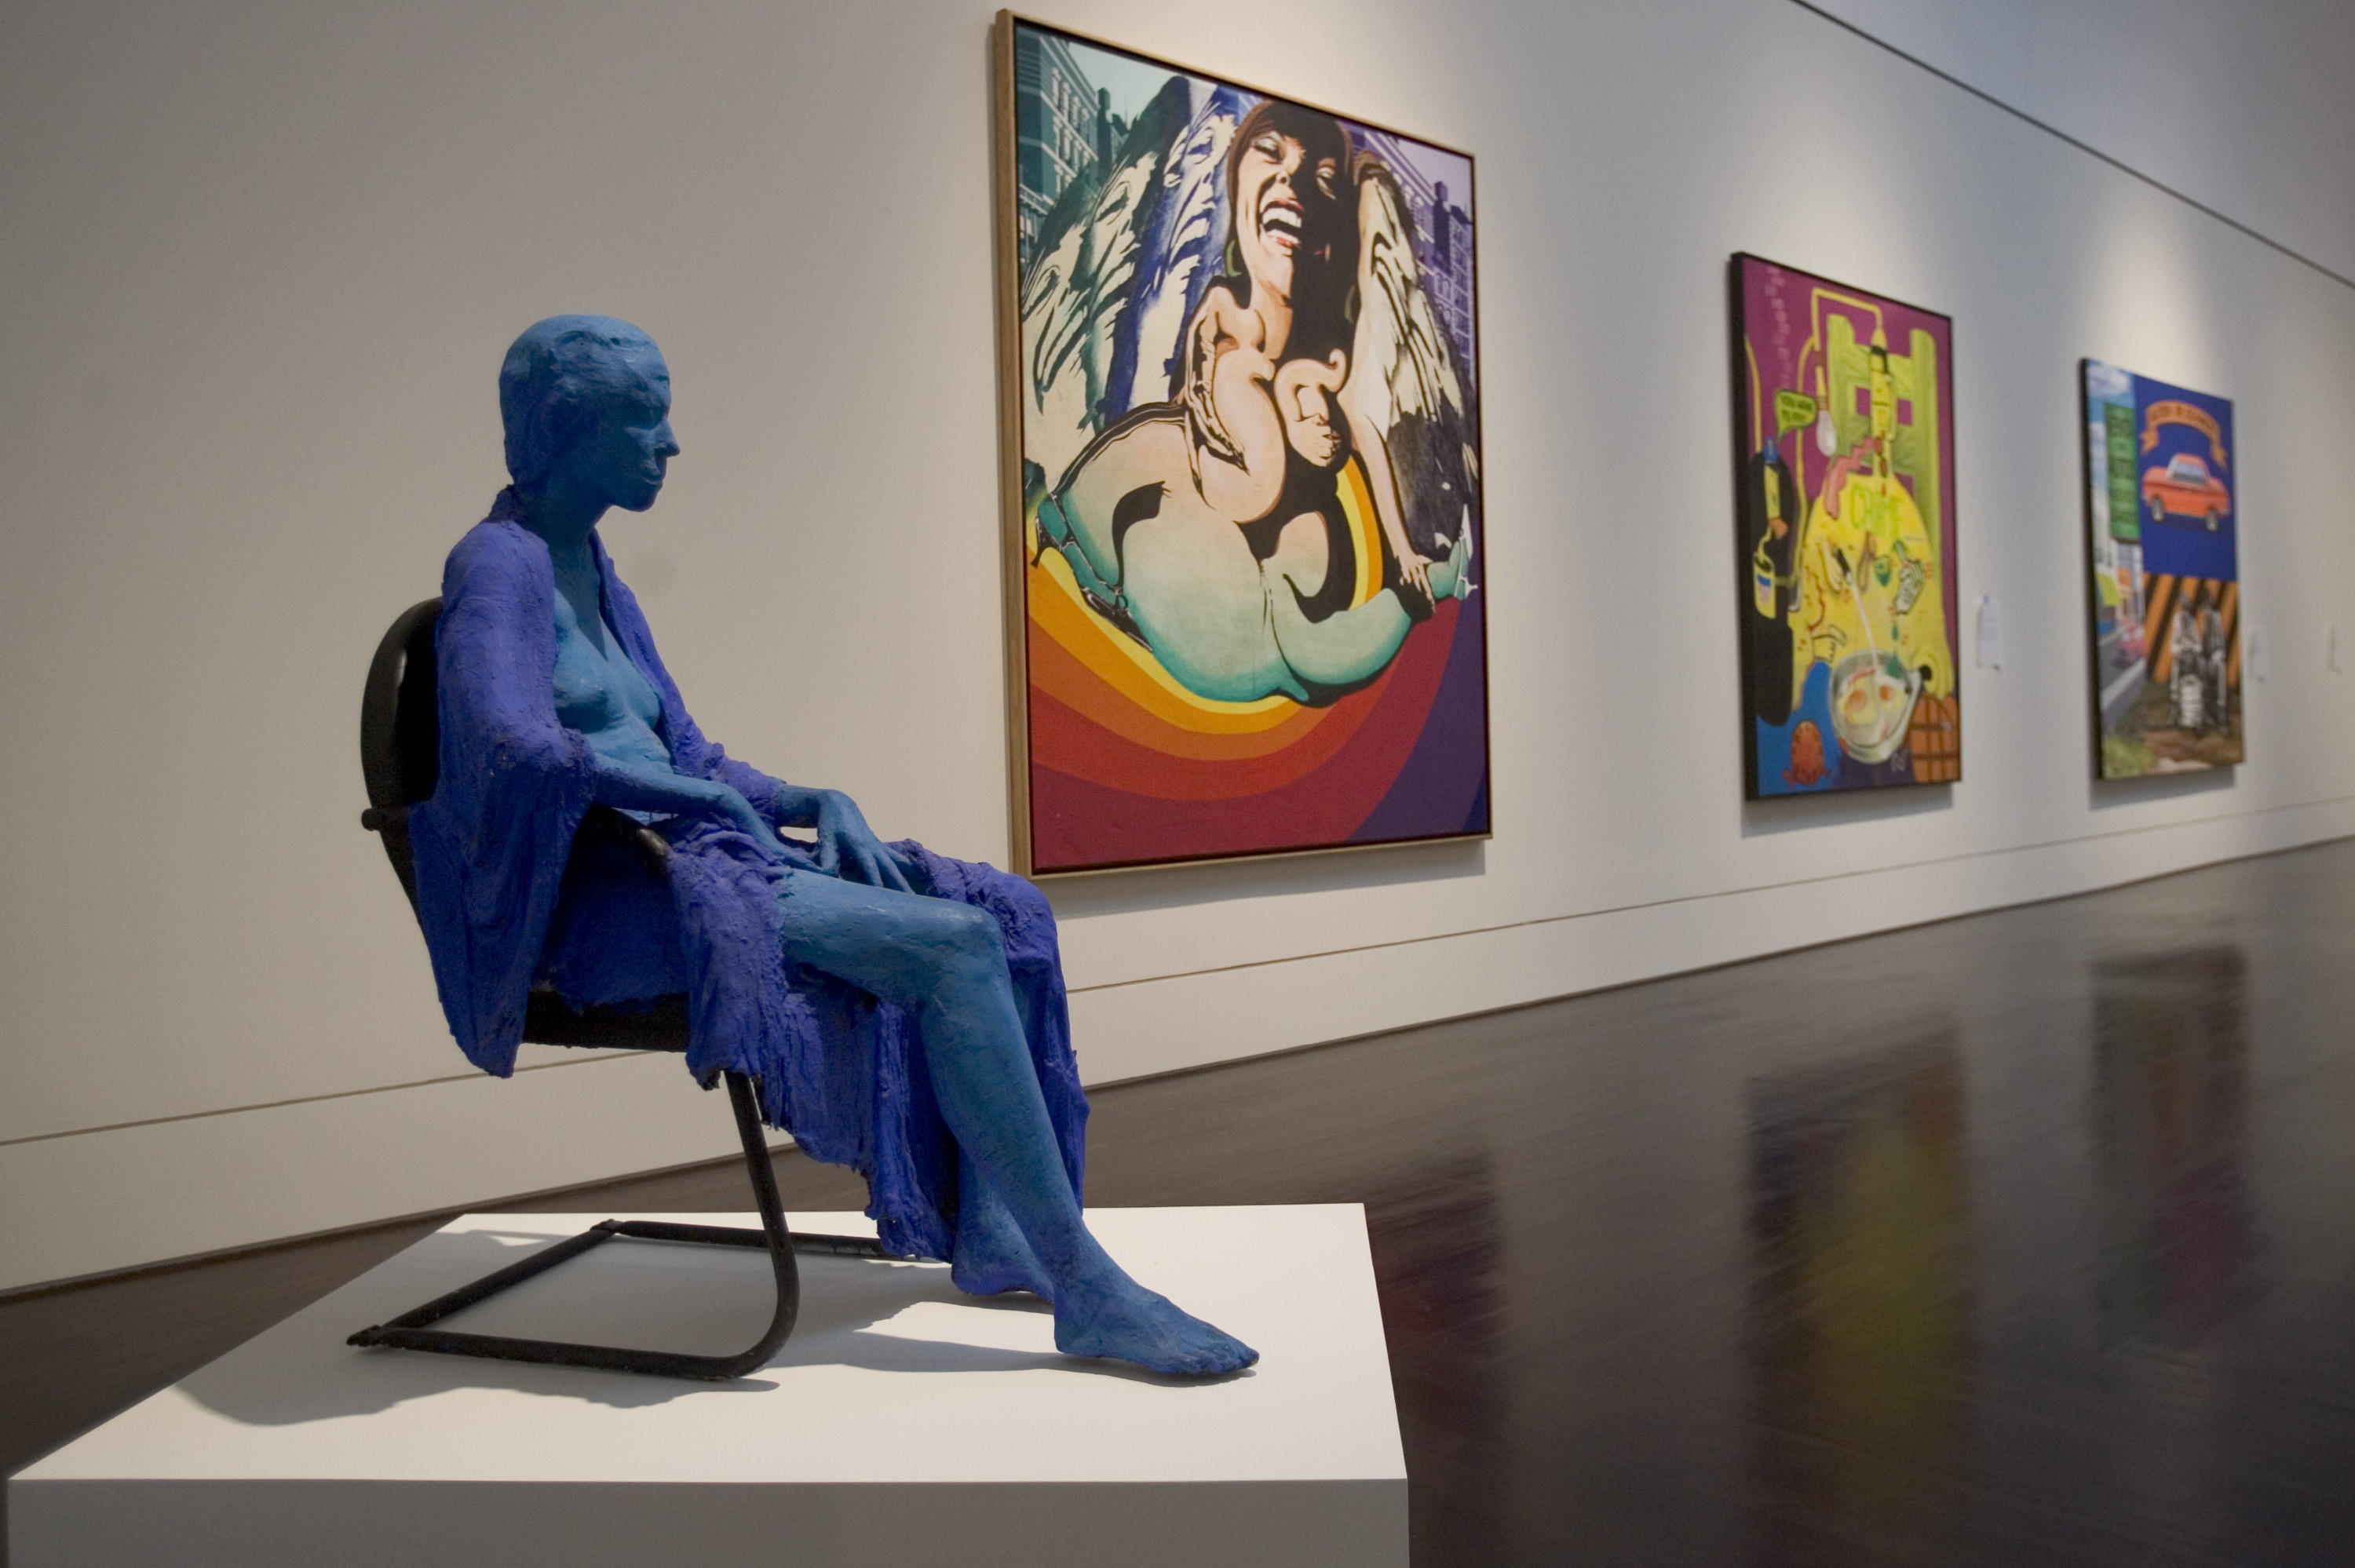 A sculpture of a blue woman sitting in a chair in an art gallery with colorful pop-art paintings hung on the white wall.